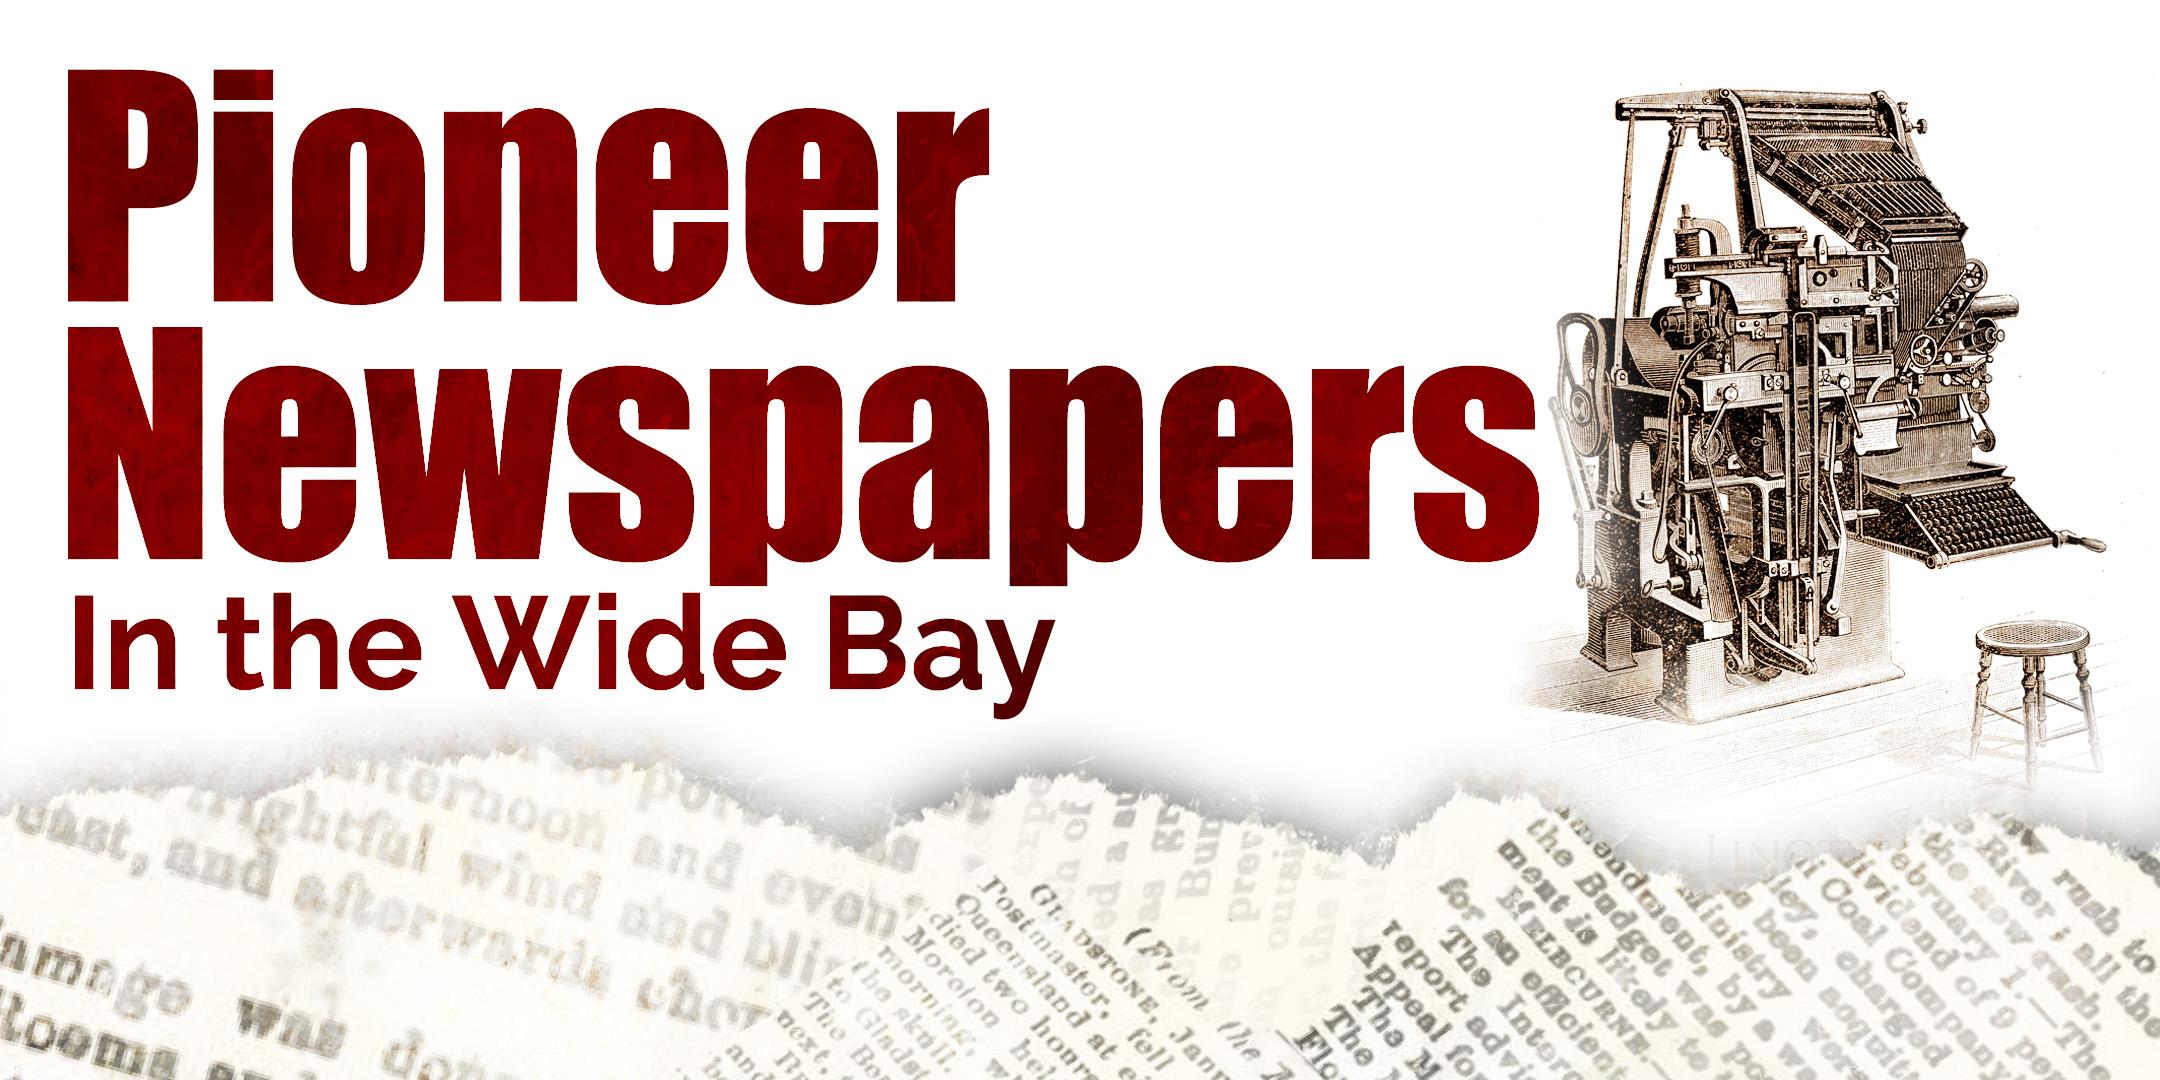 Local History Talk - Hervey Bay - Pioneer Newspapers of the Wide Bay presented by Margaret Slocomb- All ages